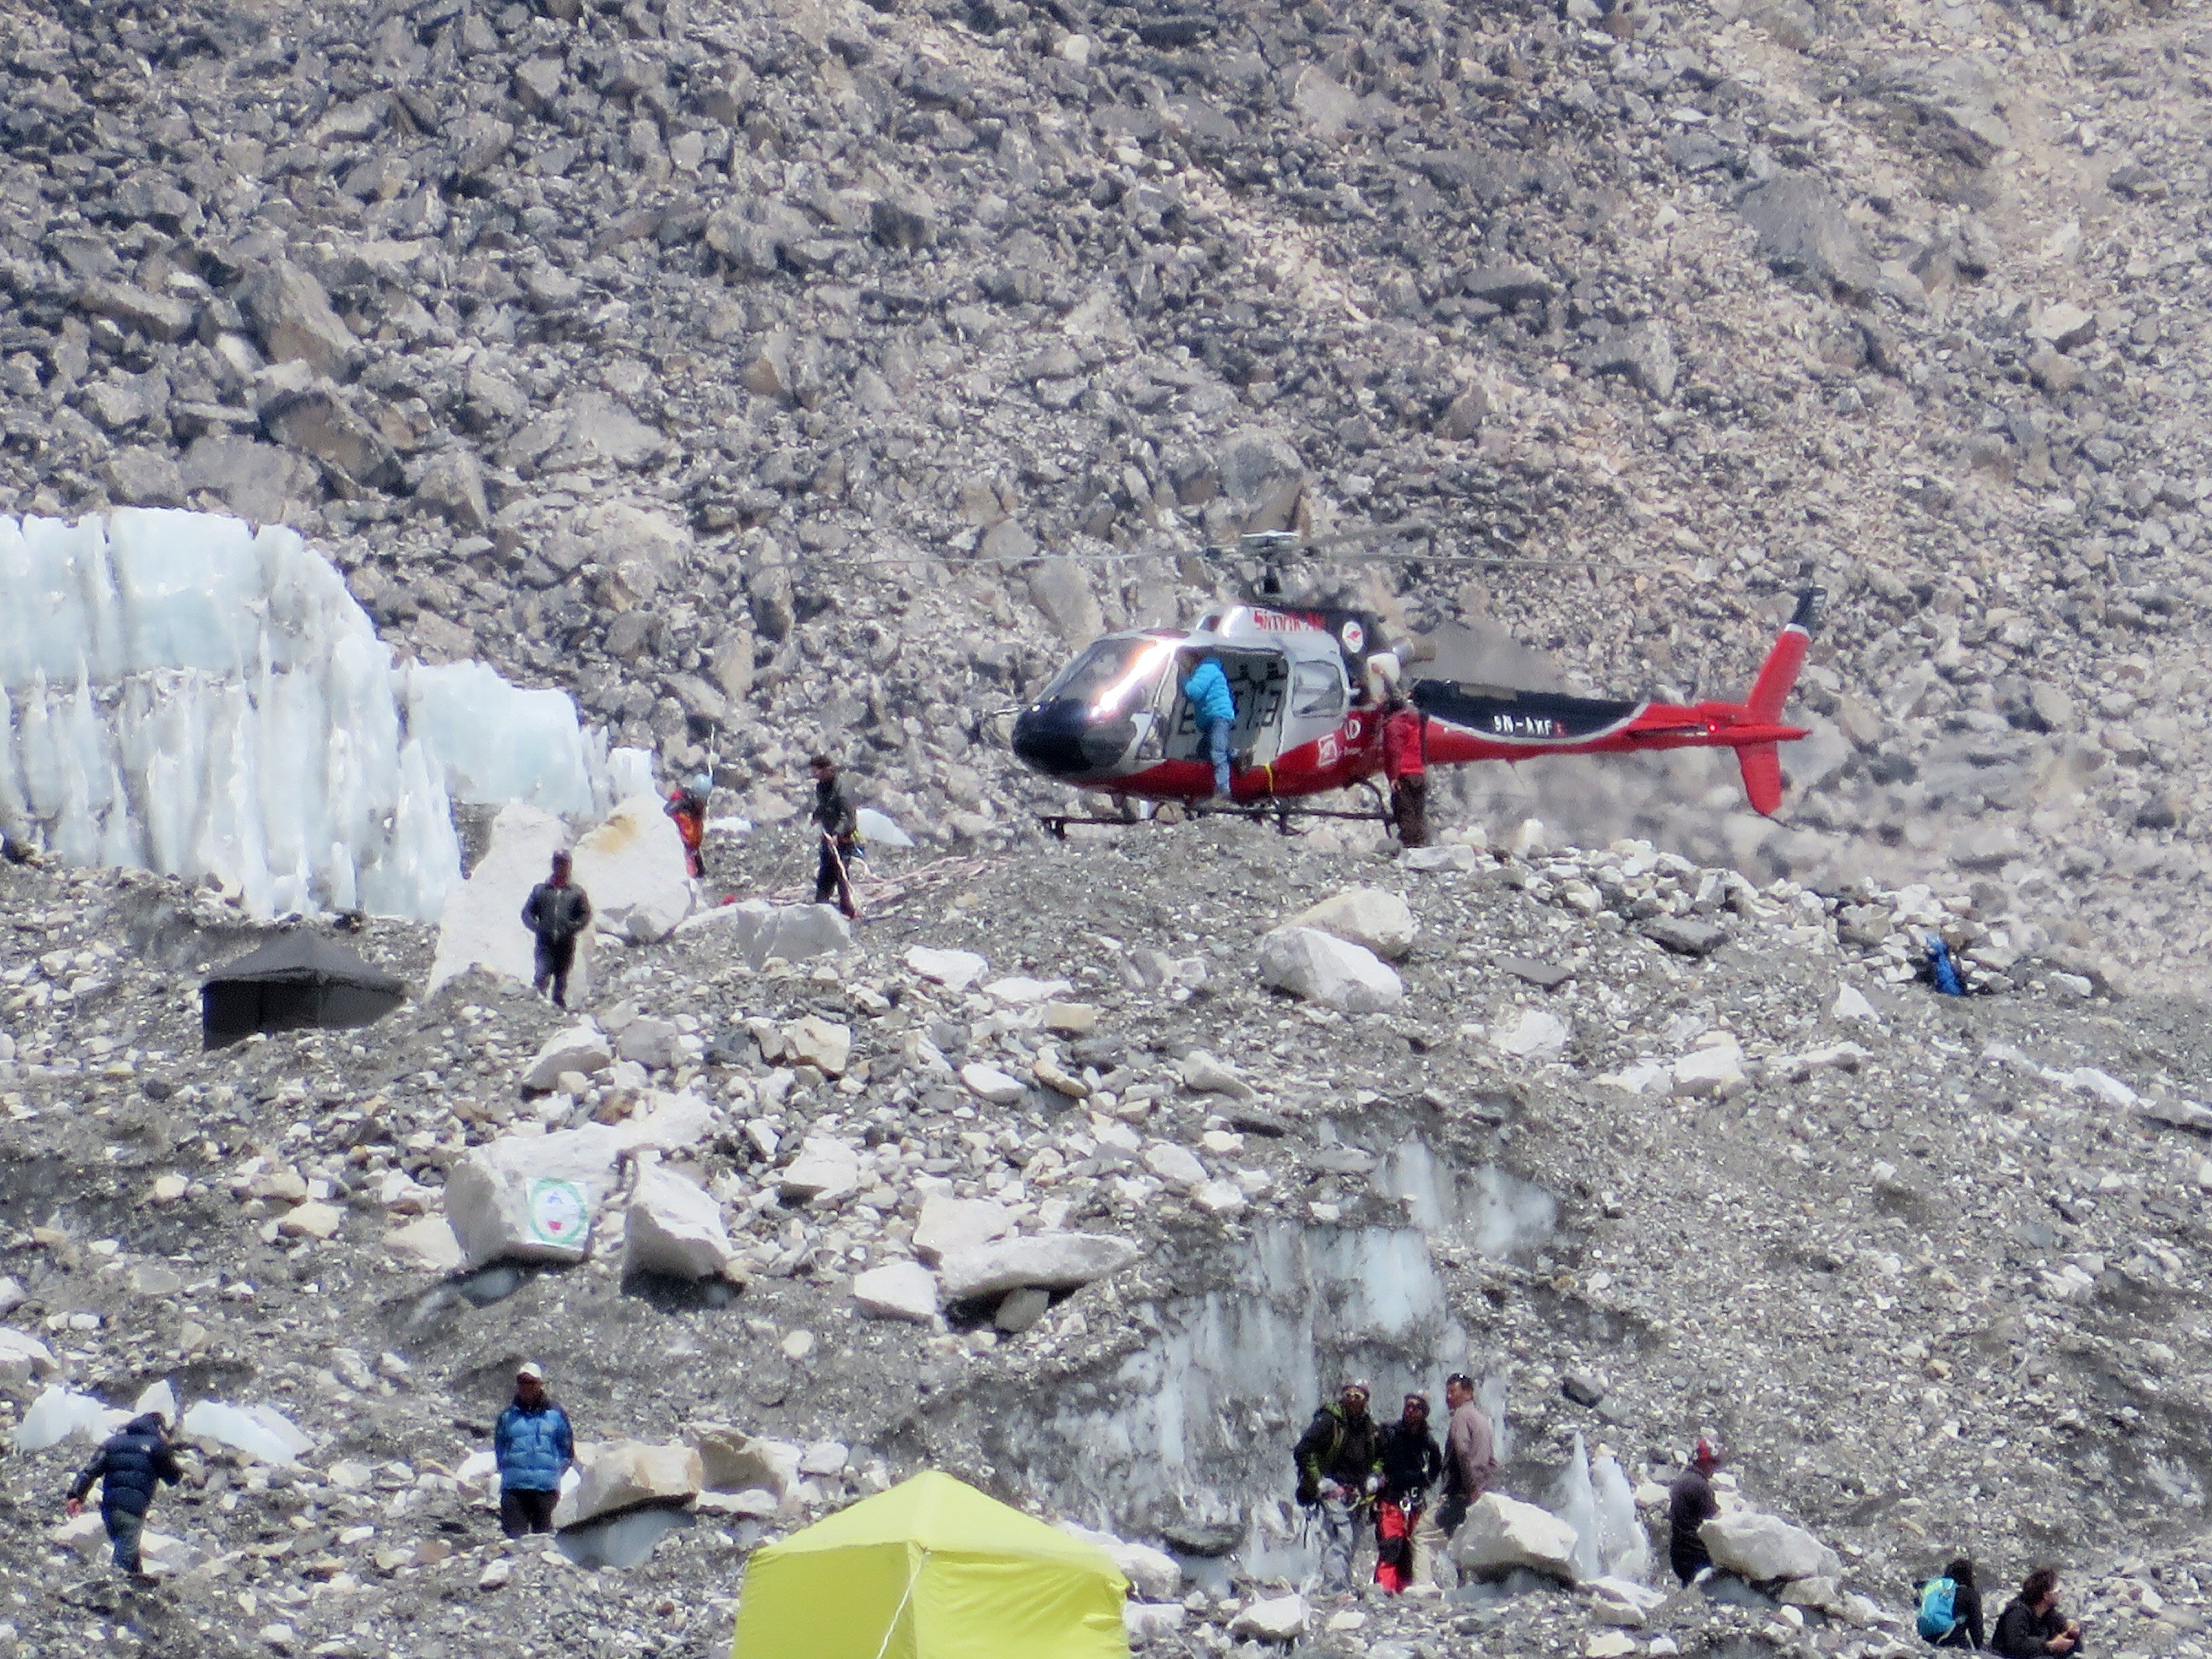 A Nepalese rescue helicopter lands at Everest Base Camp during rescue efforts following an avalanche that killed 16 Nepalese sherpas in the Khumbu icefall in 2014